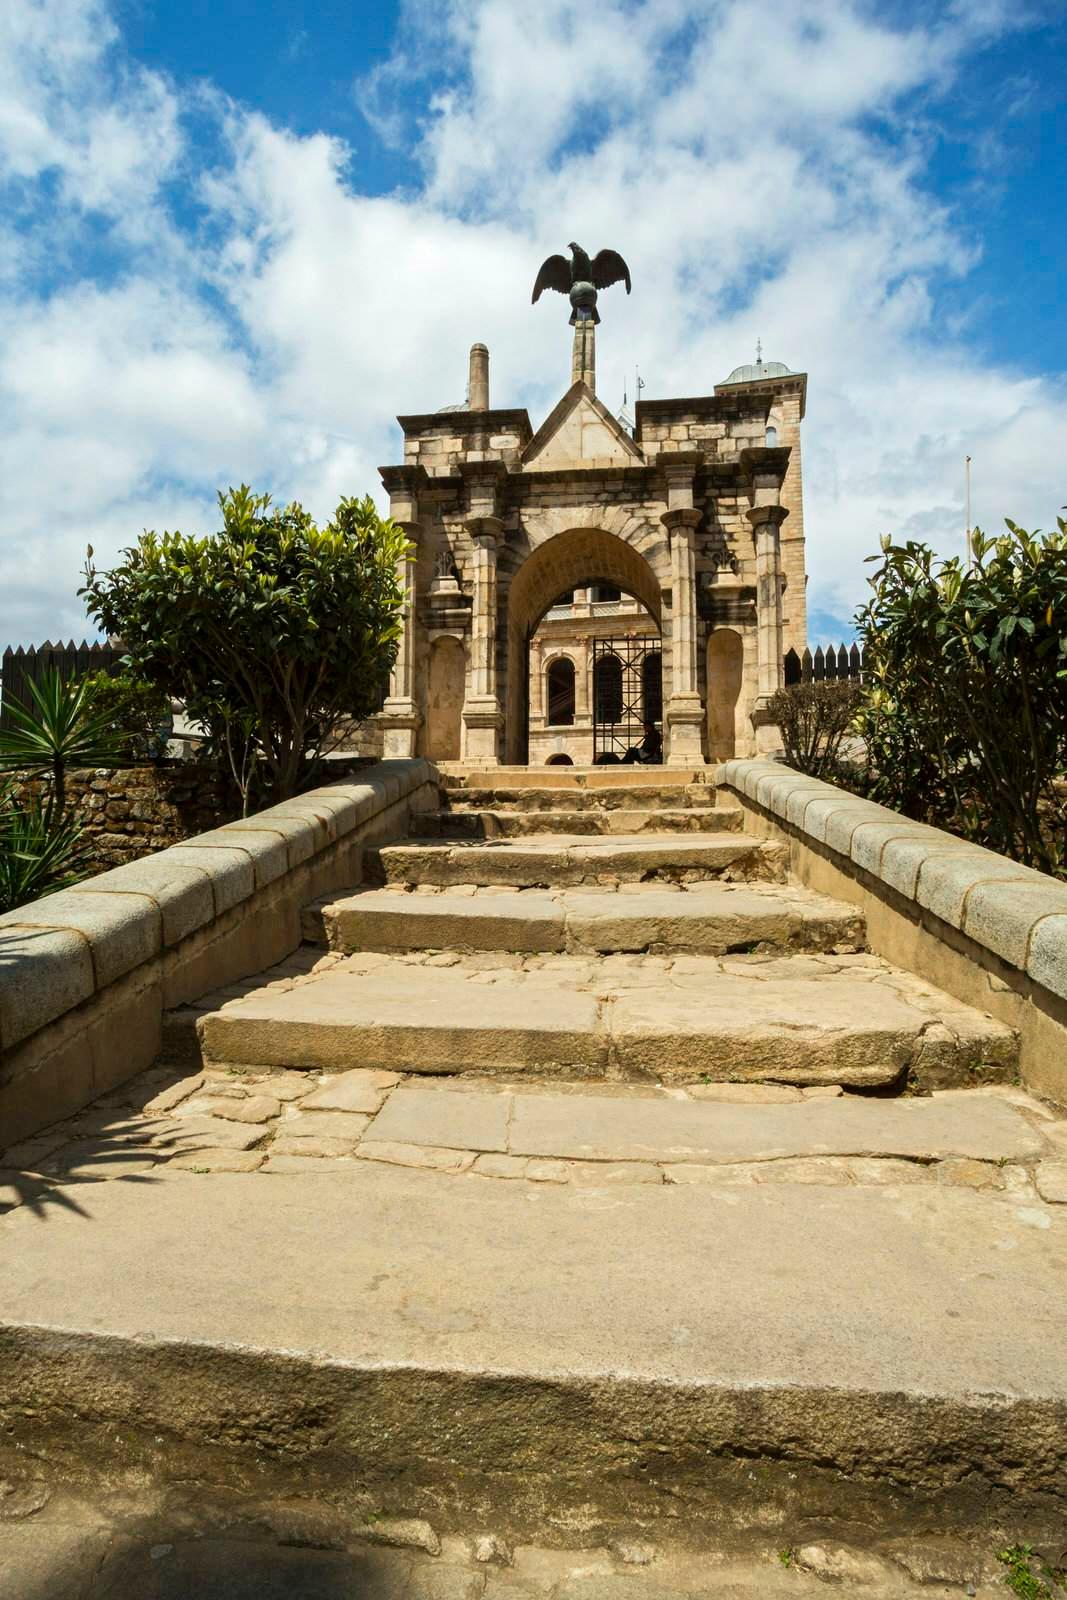 This image looks up a step of wide (and long) stone steps towards an ornate stone gate topped by a copper/bronze eagle statue. The Rova stands in the background © Yann Guichaoua-Photos / Lonely Planet